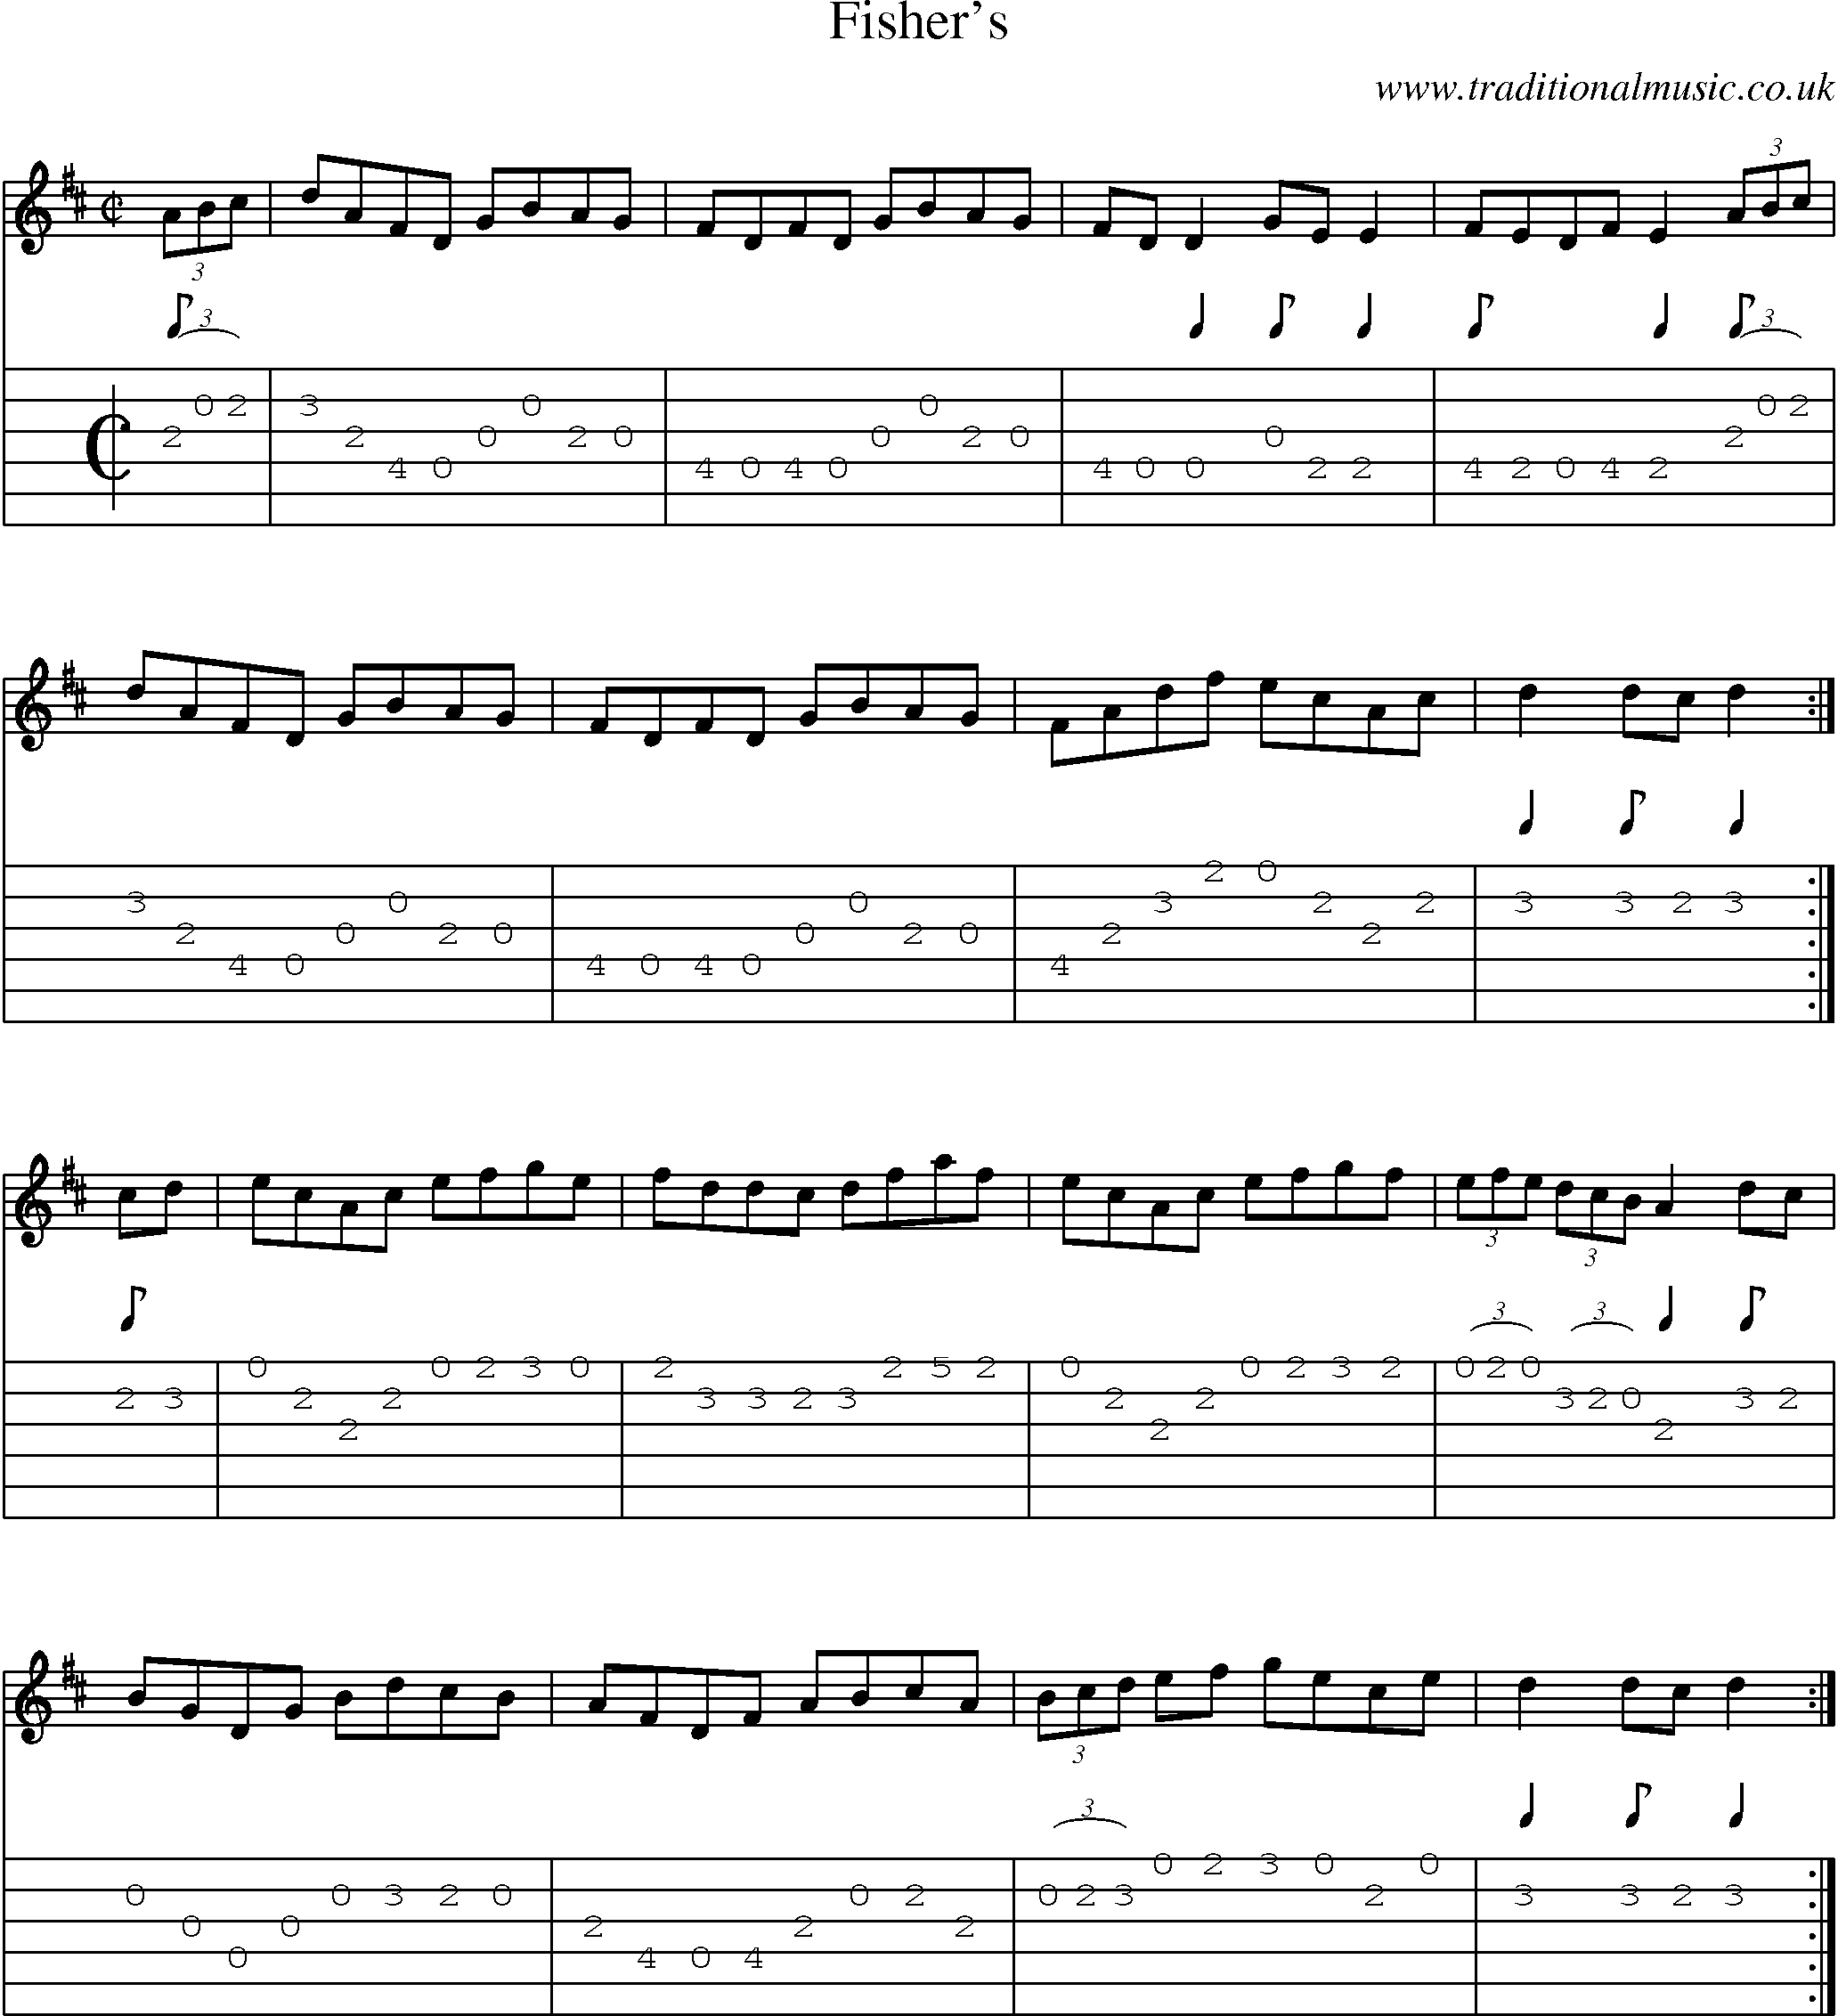 Music Score and Guitar Tabs for Fishers